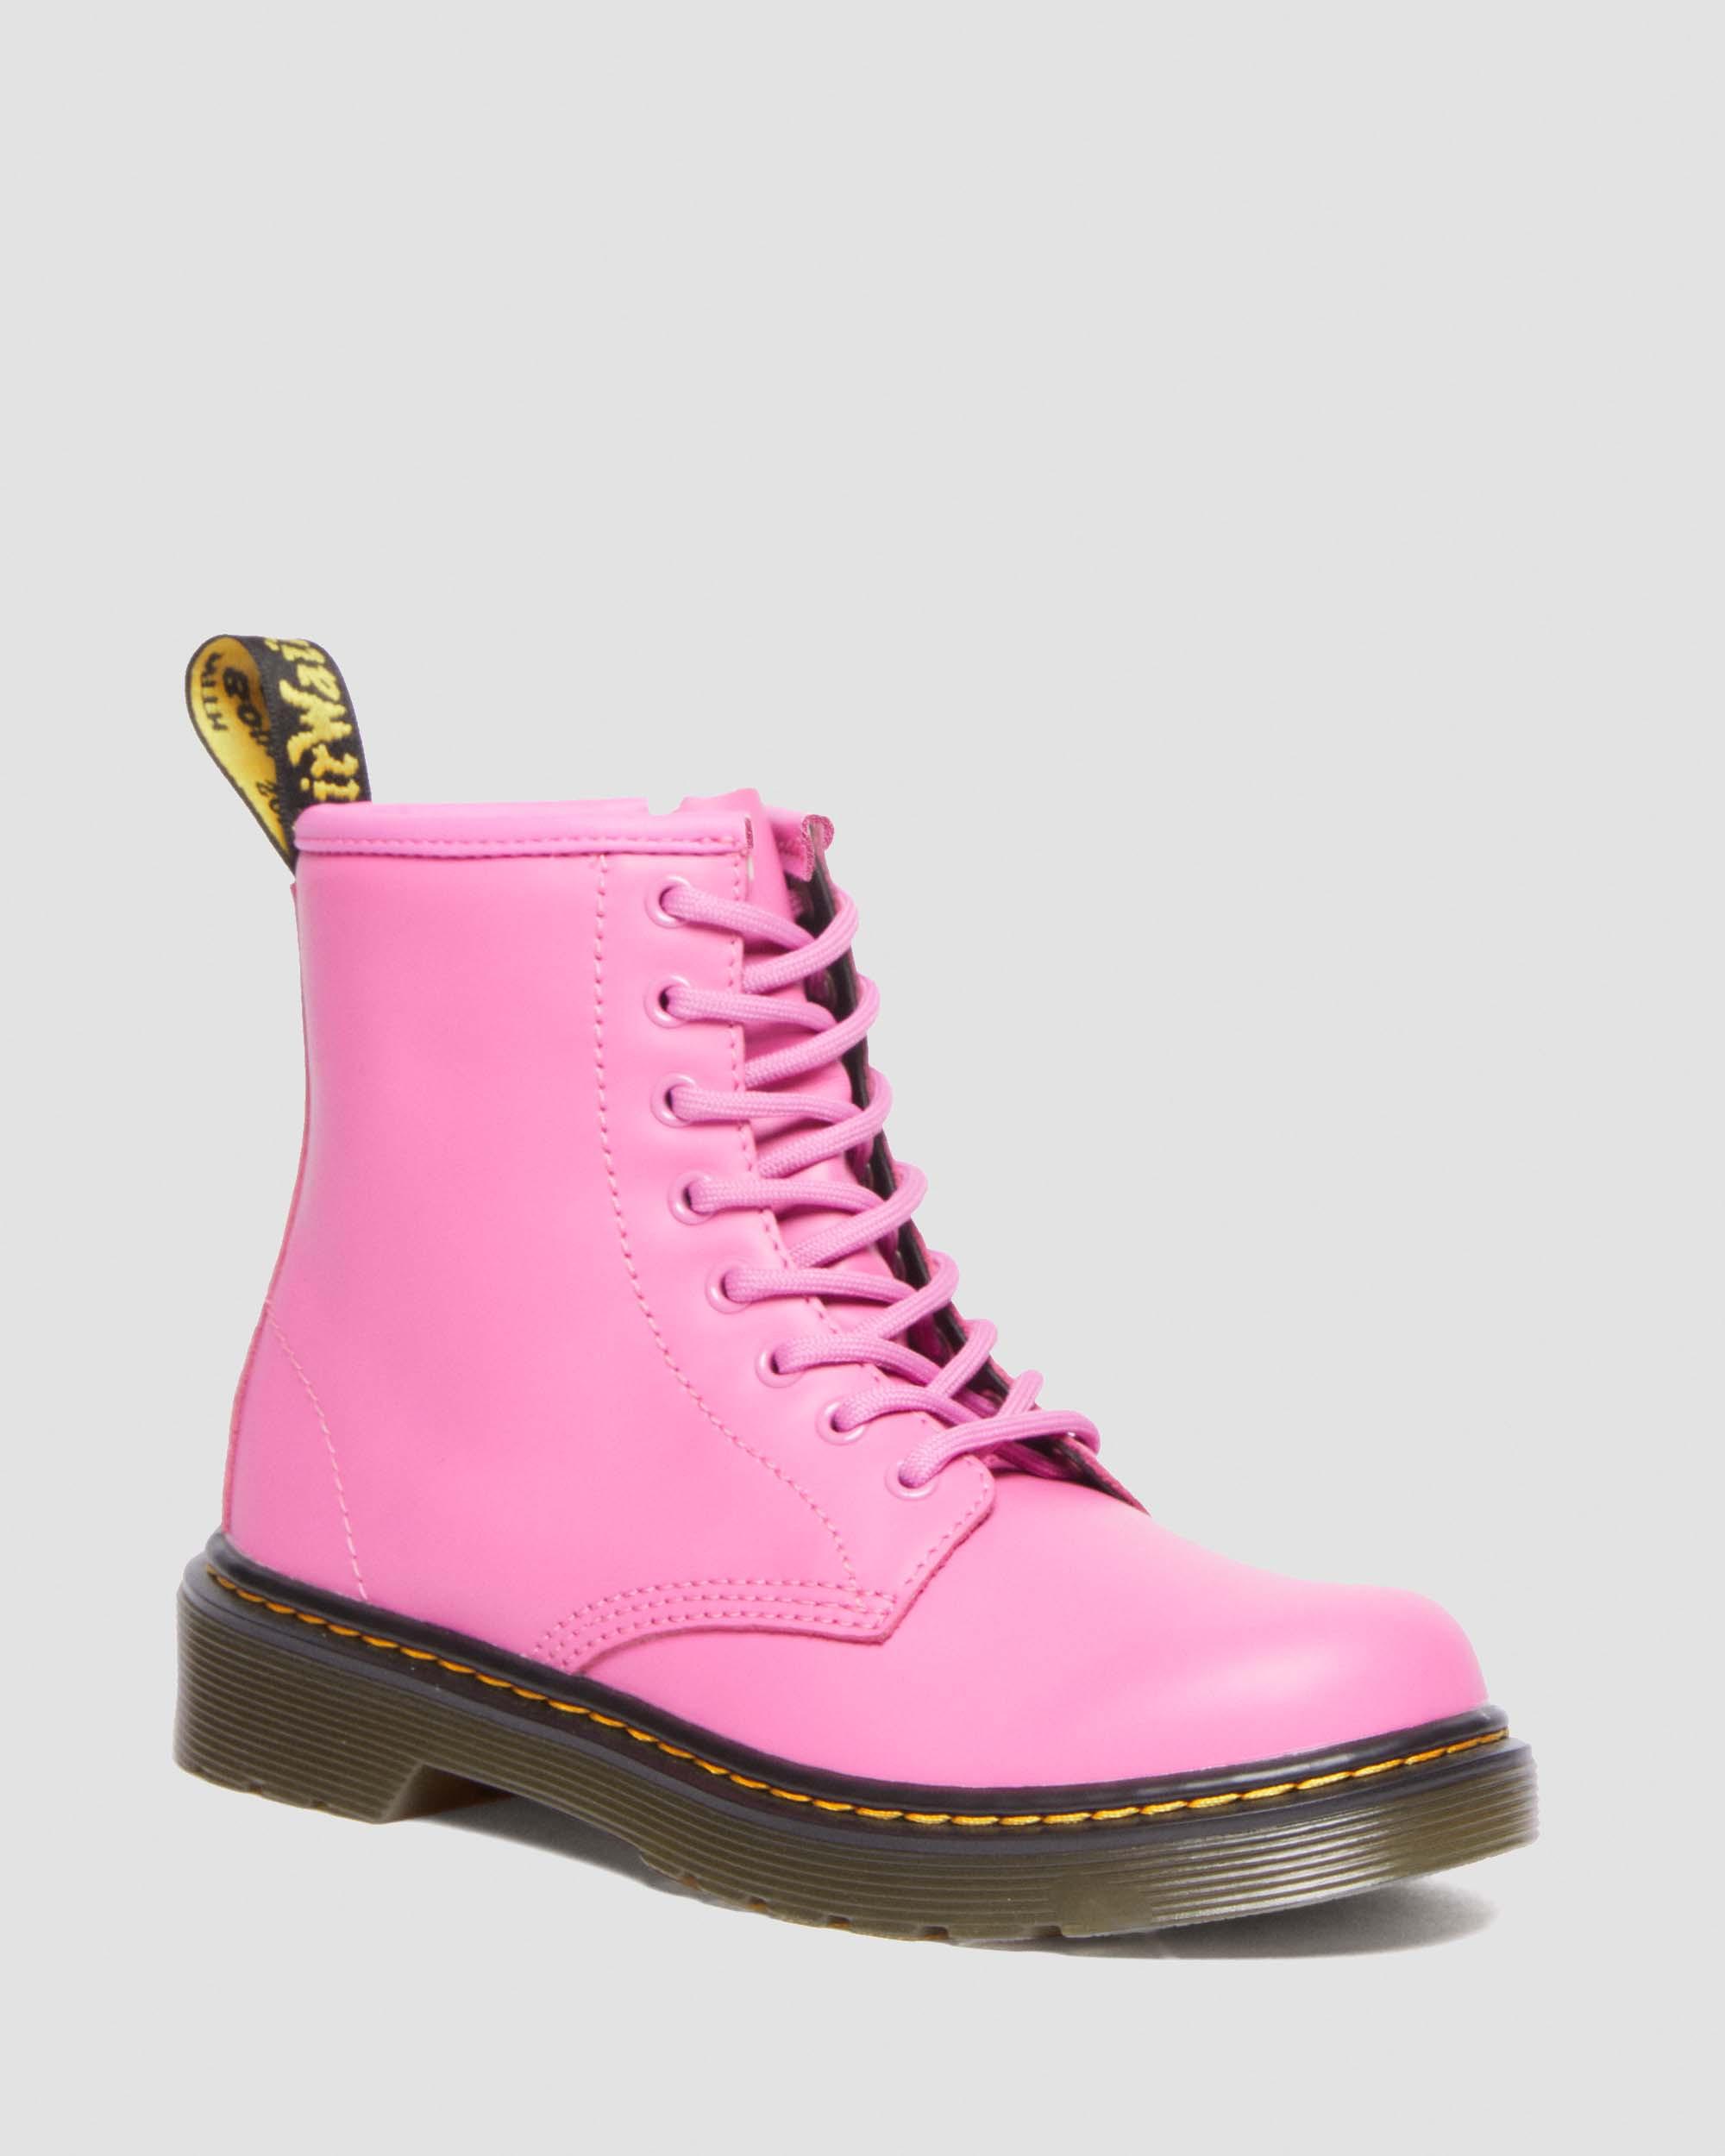 Leather Lace Junior Boots Martens Pink Dr. | 1460 Thrift in Up